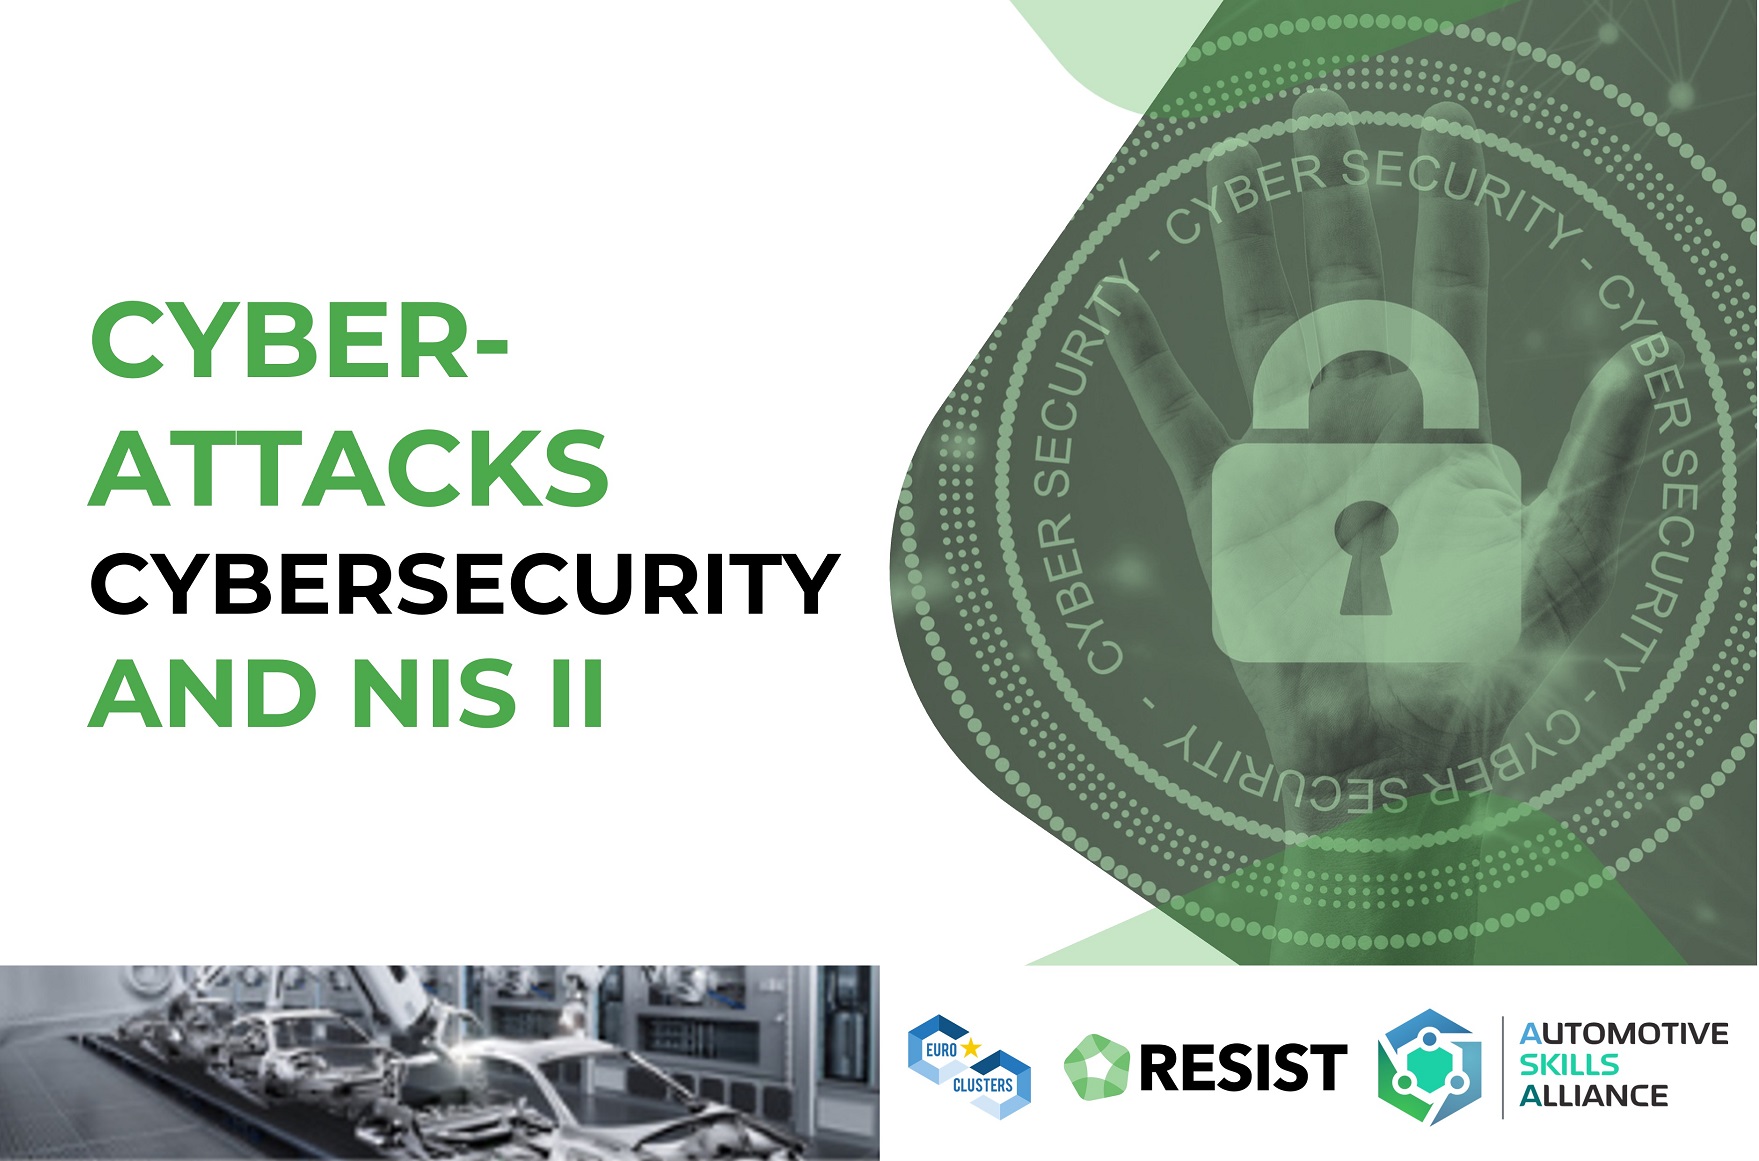 RESIST - Cyber security for employees